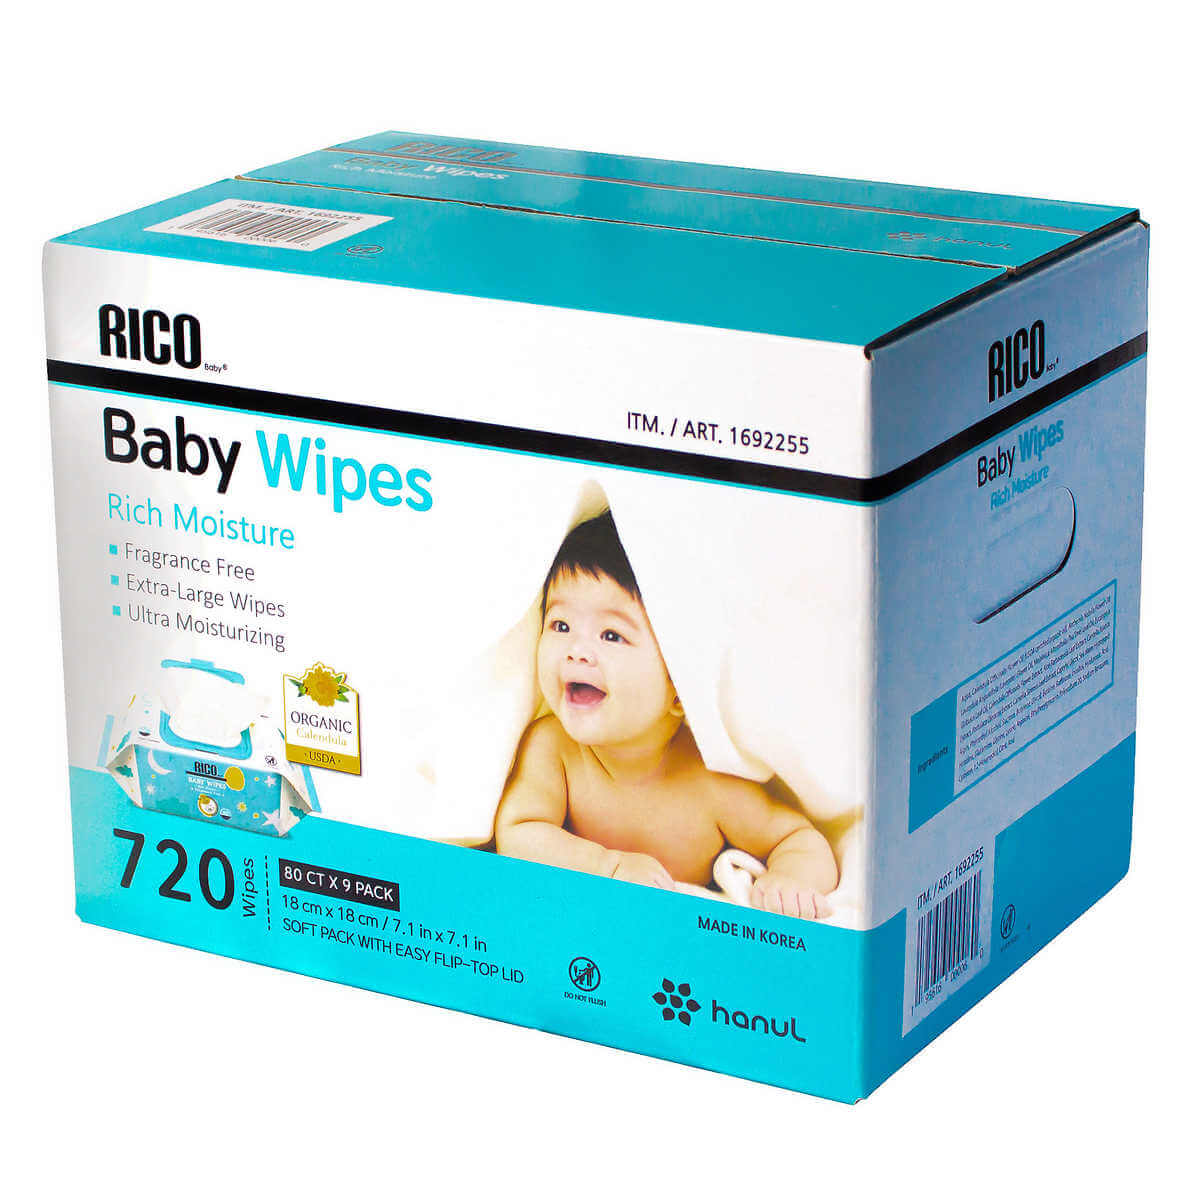 RICO Baby Wipes - 720-count